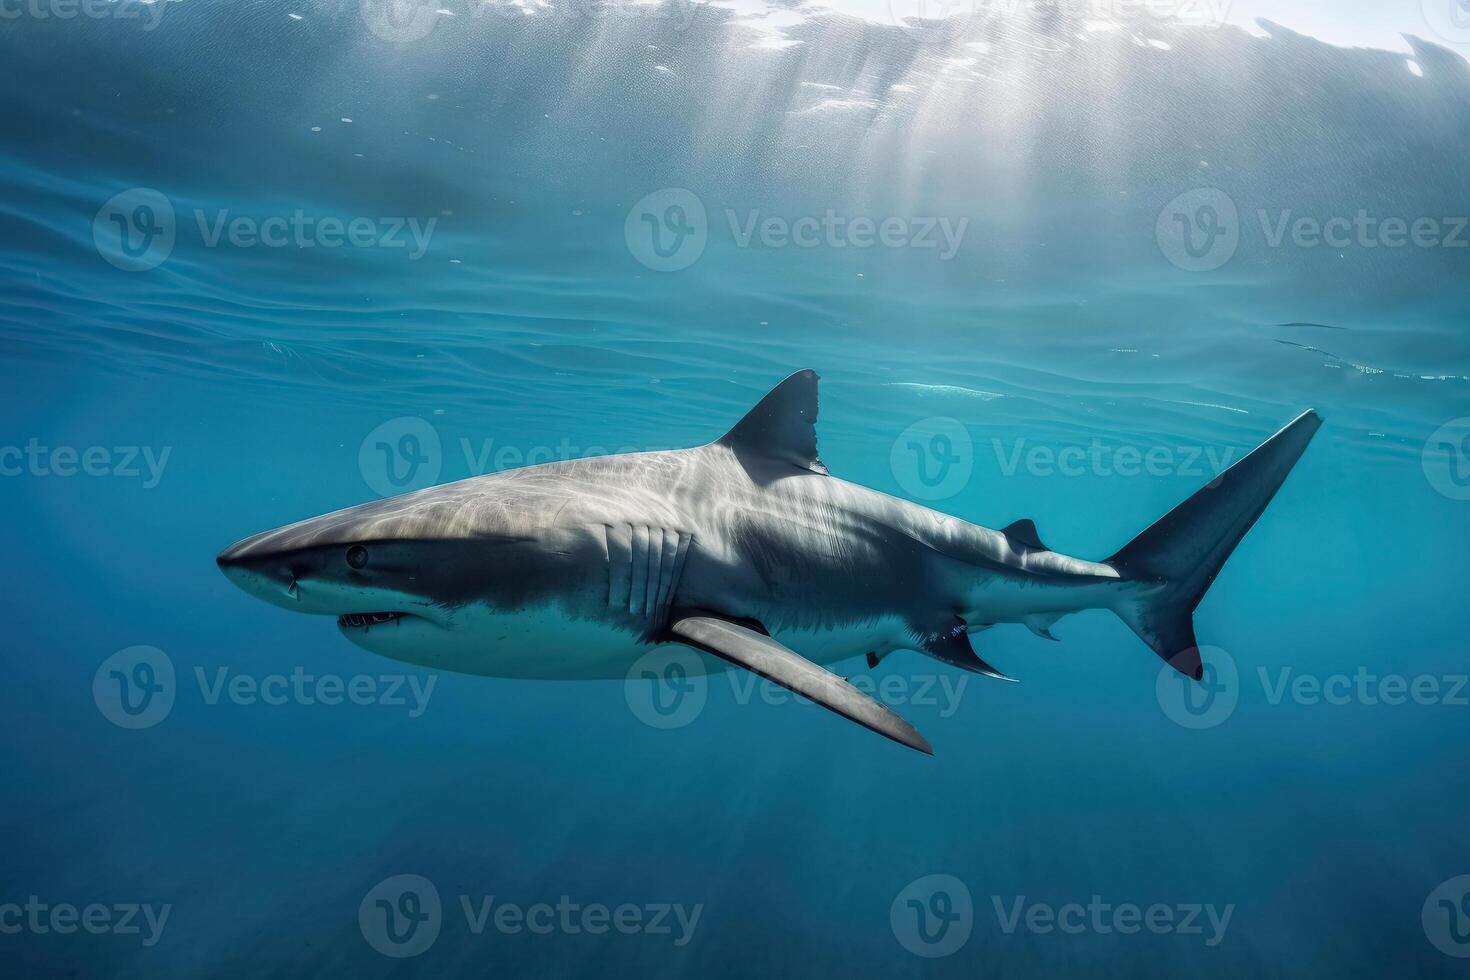 A big shark in the shallow water of the ocean created with technology. photo